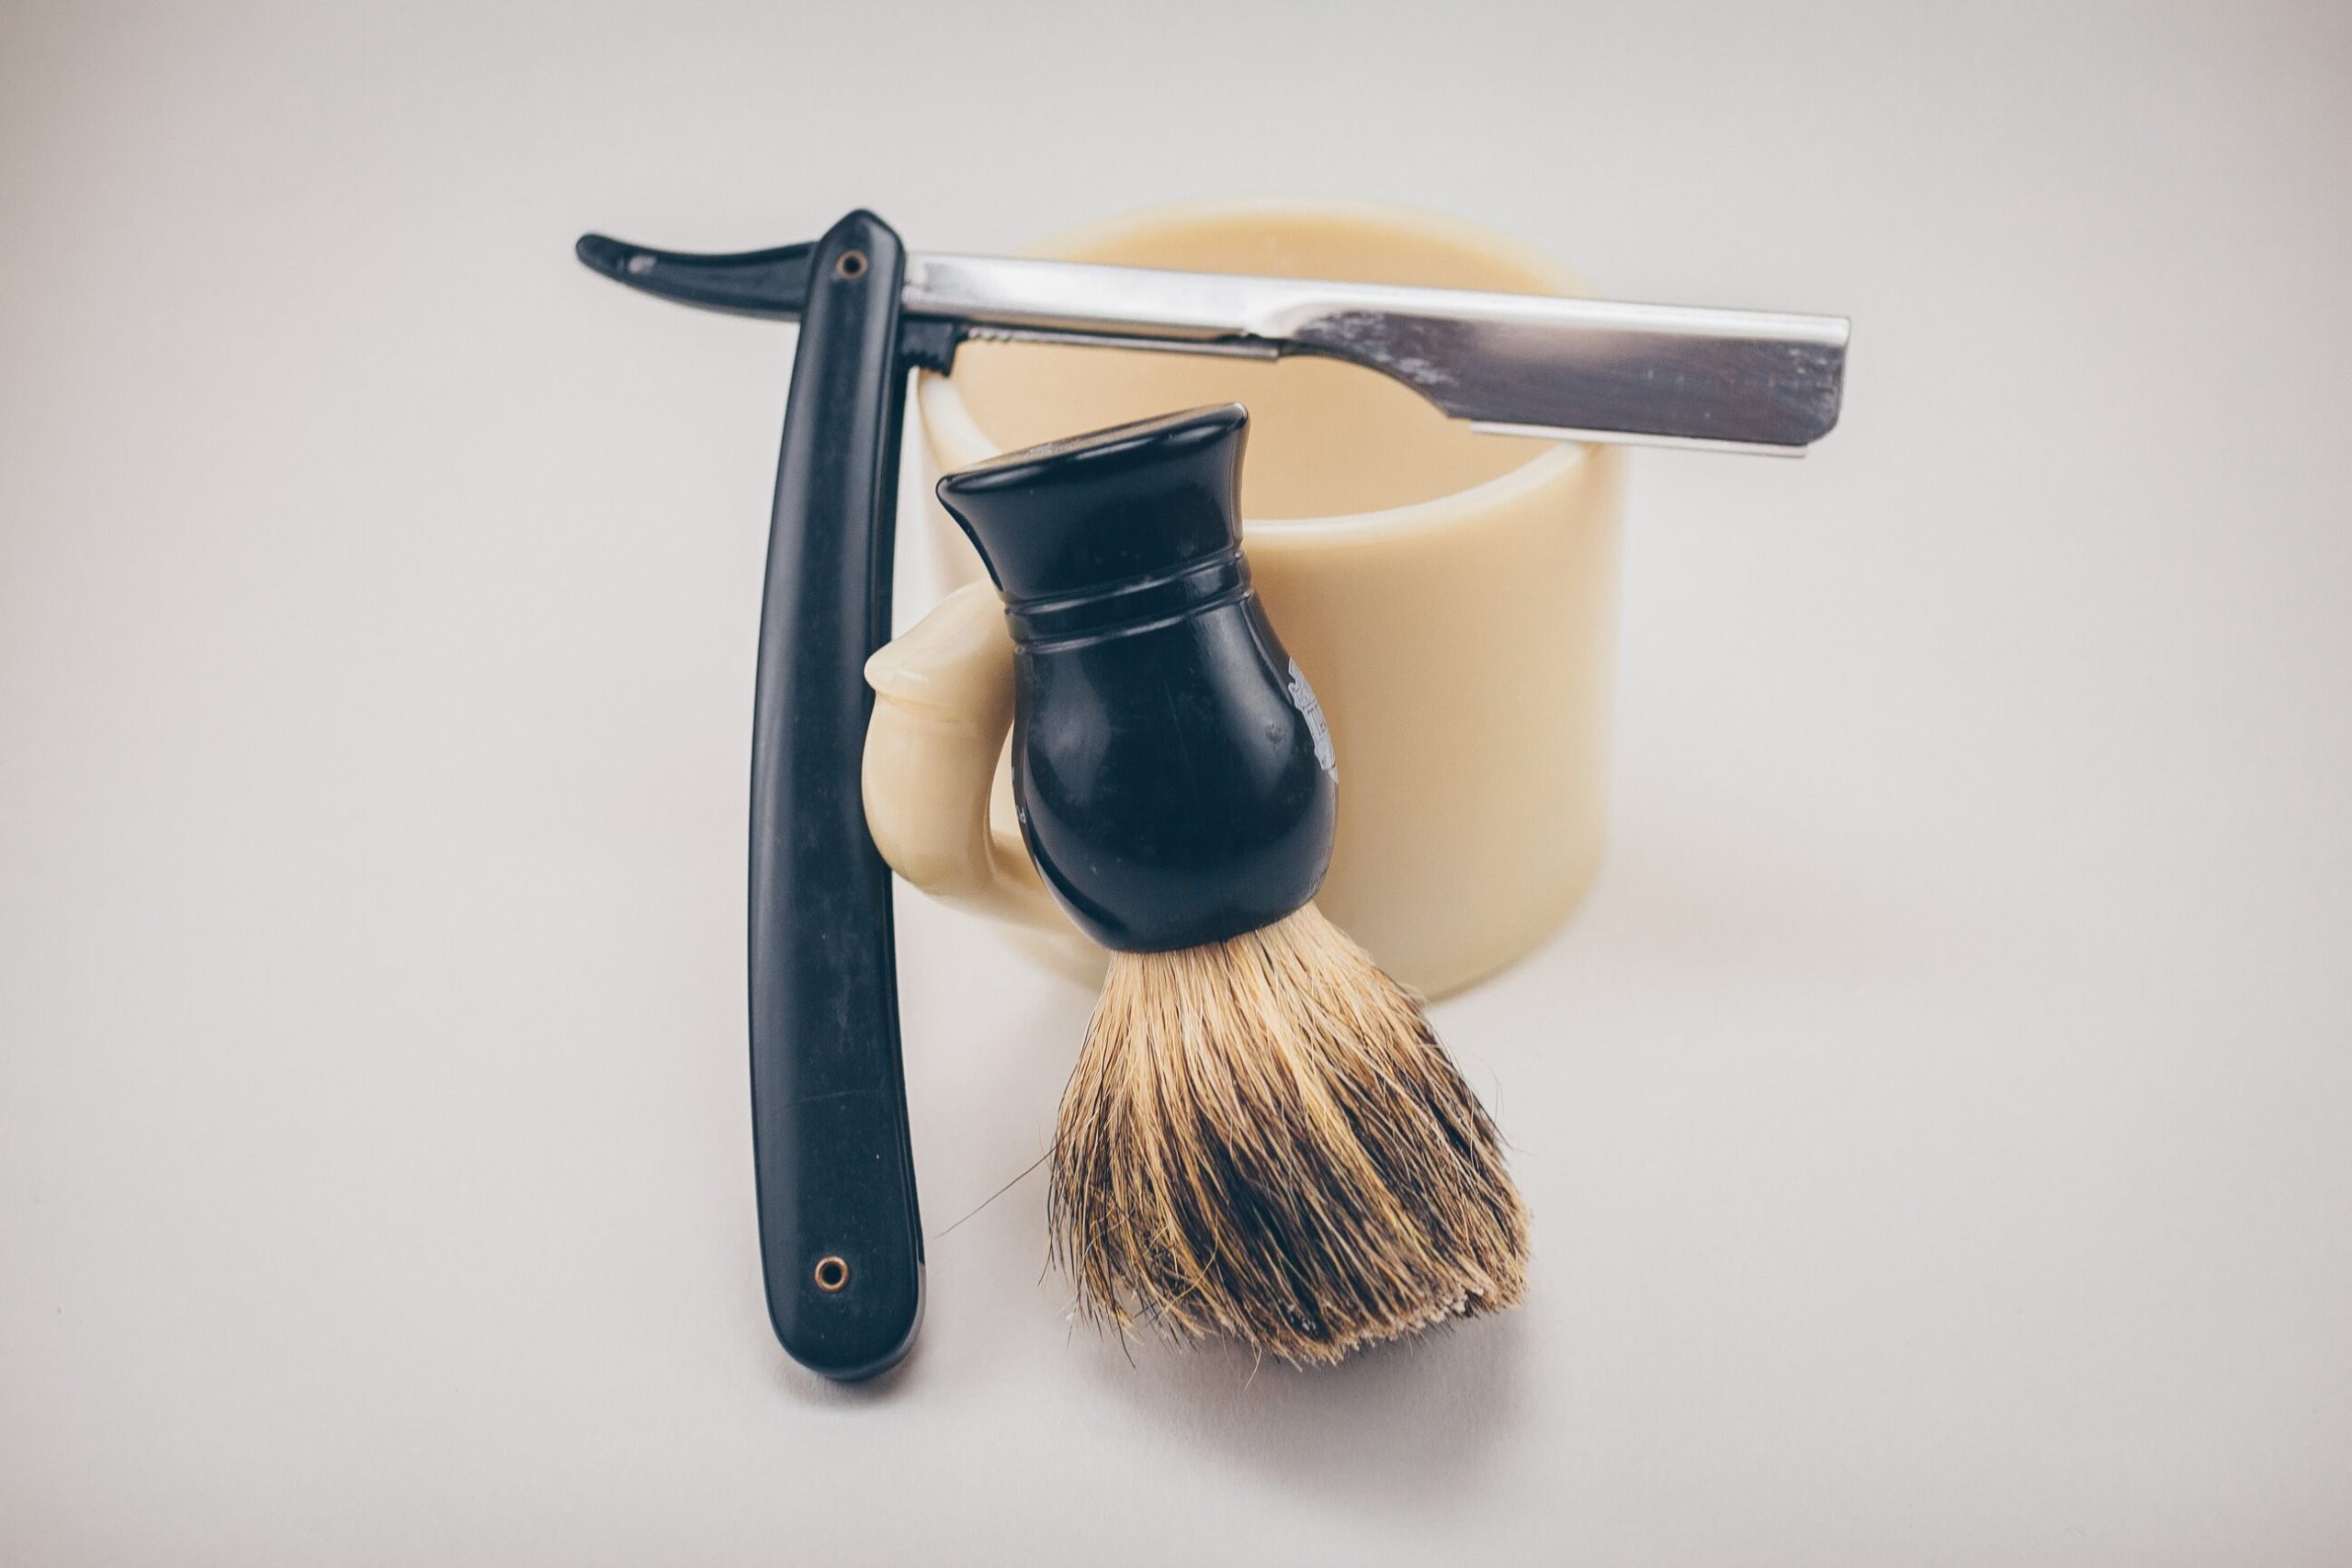 Top 5 Benefits of Choosing a Straight Razor for Your Shave